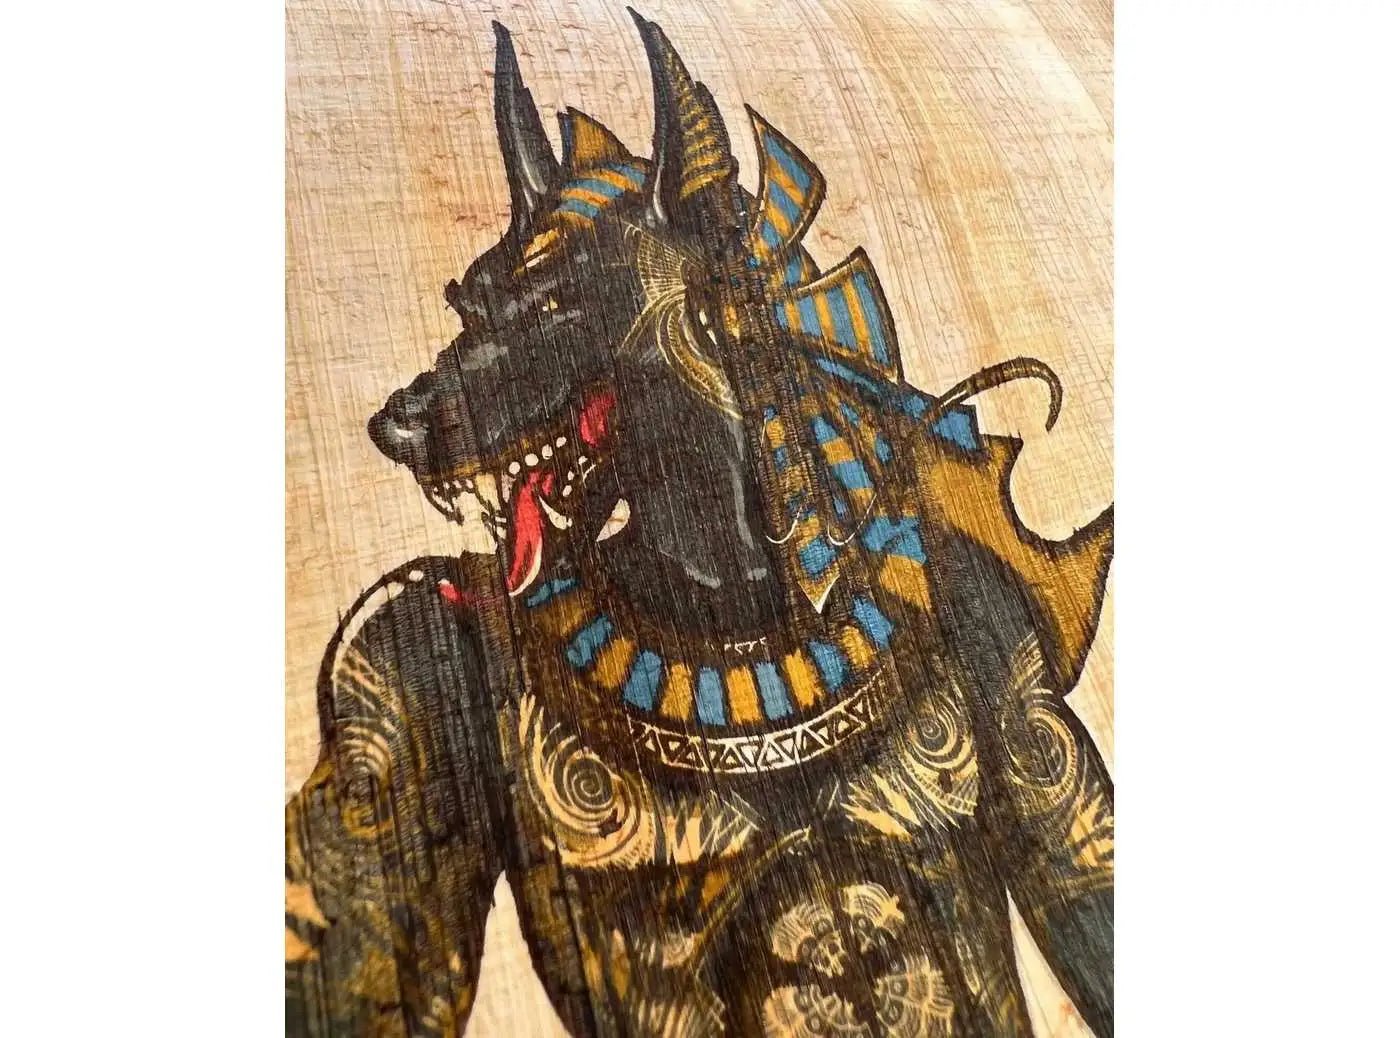 Egyptian God Anubis with A Weapon Illustration Printing on Egyptian Vintage Egypt Papyrus Paper